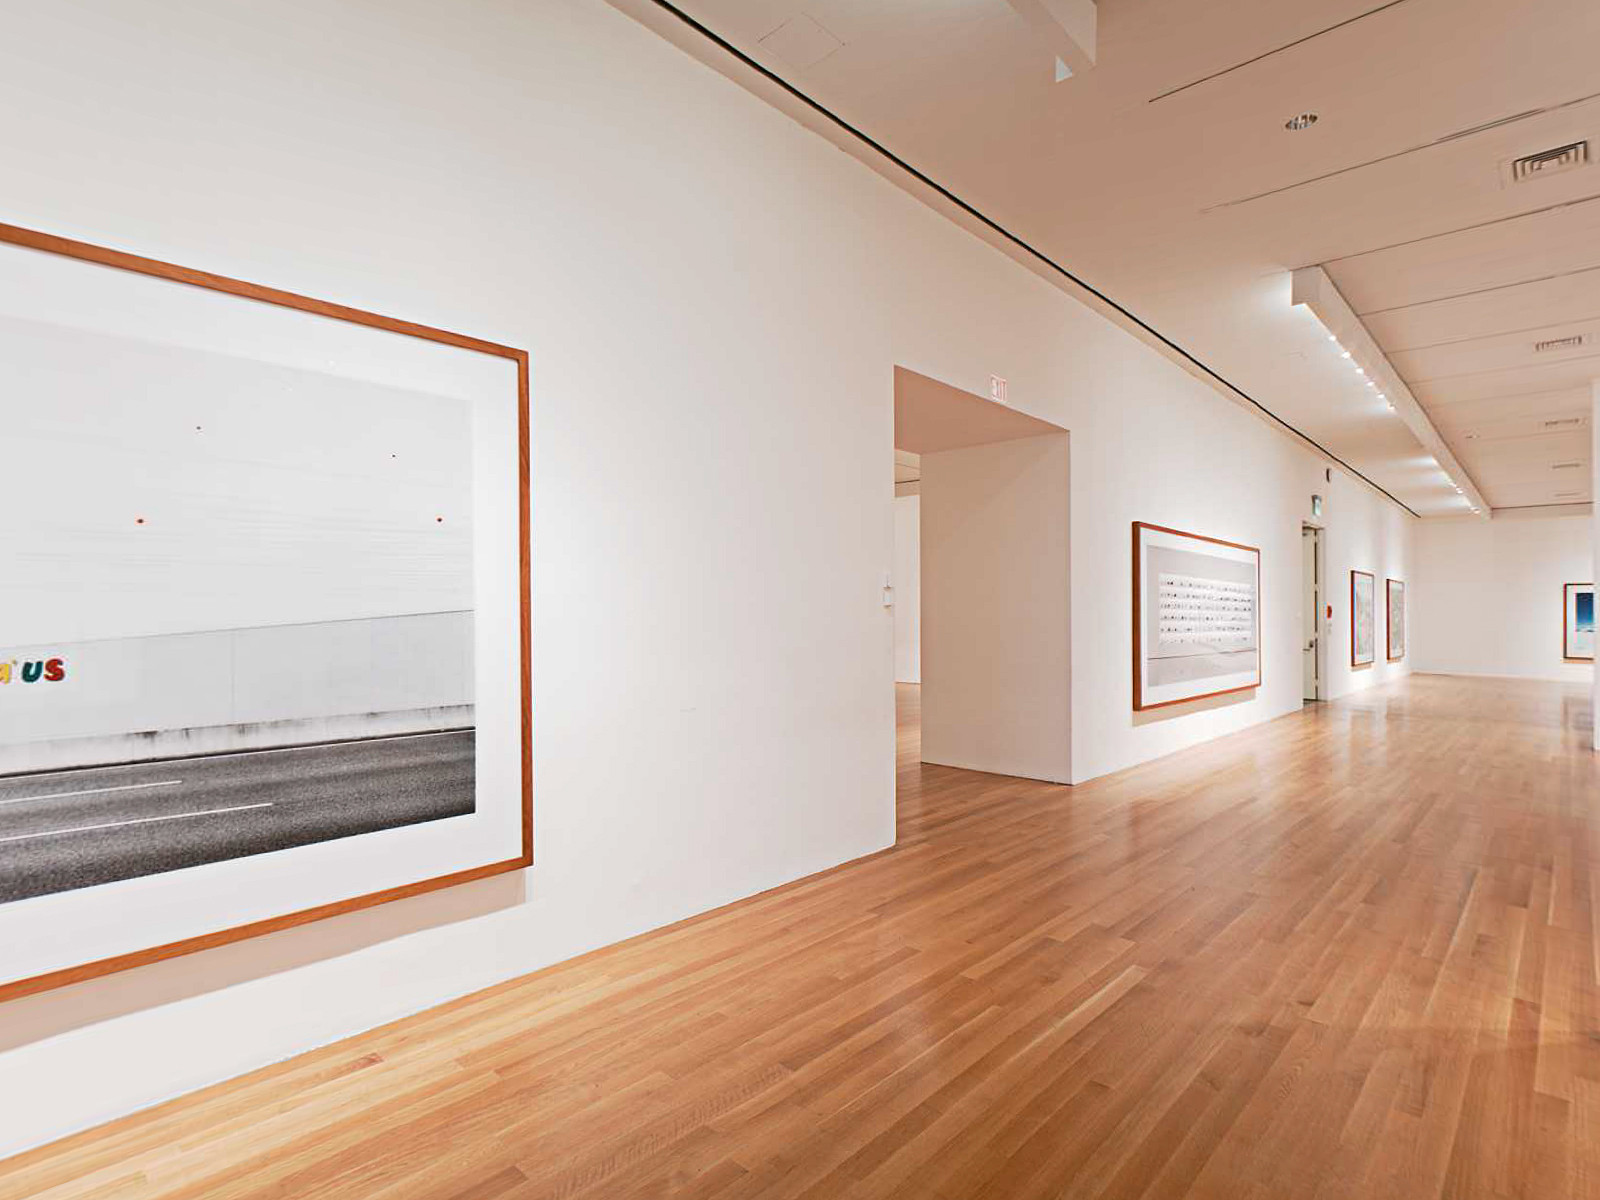 Installation view of the exhibition "Andreas Gursky" MoMA